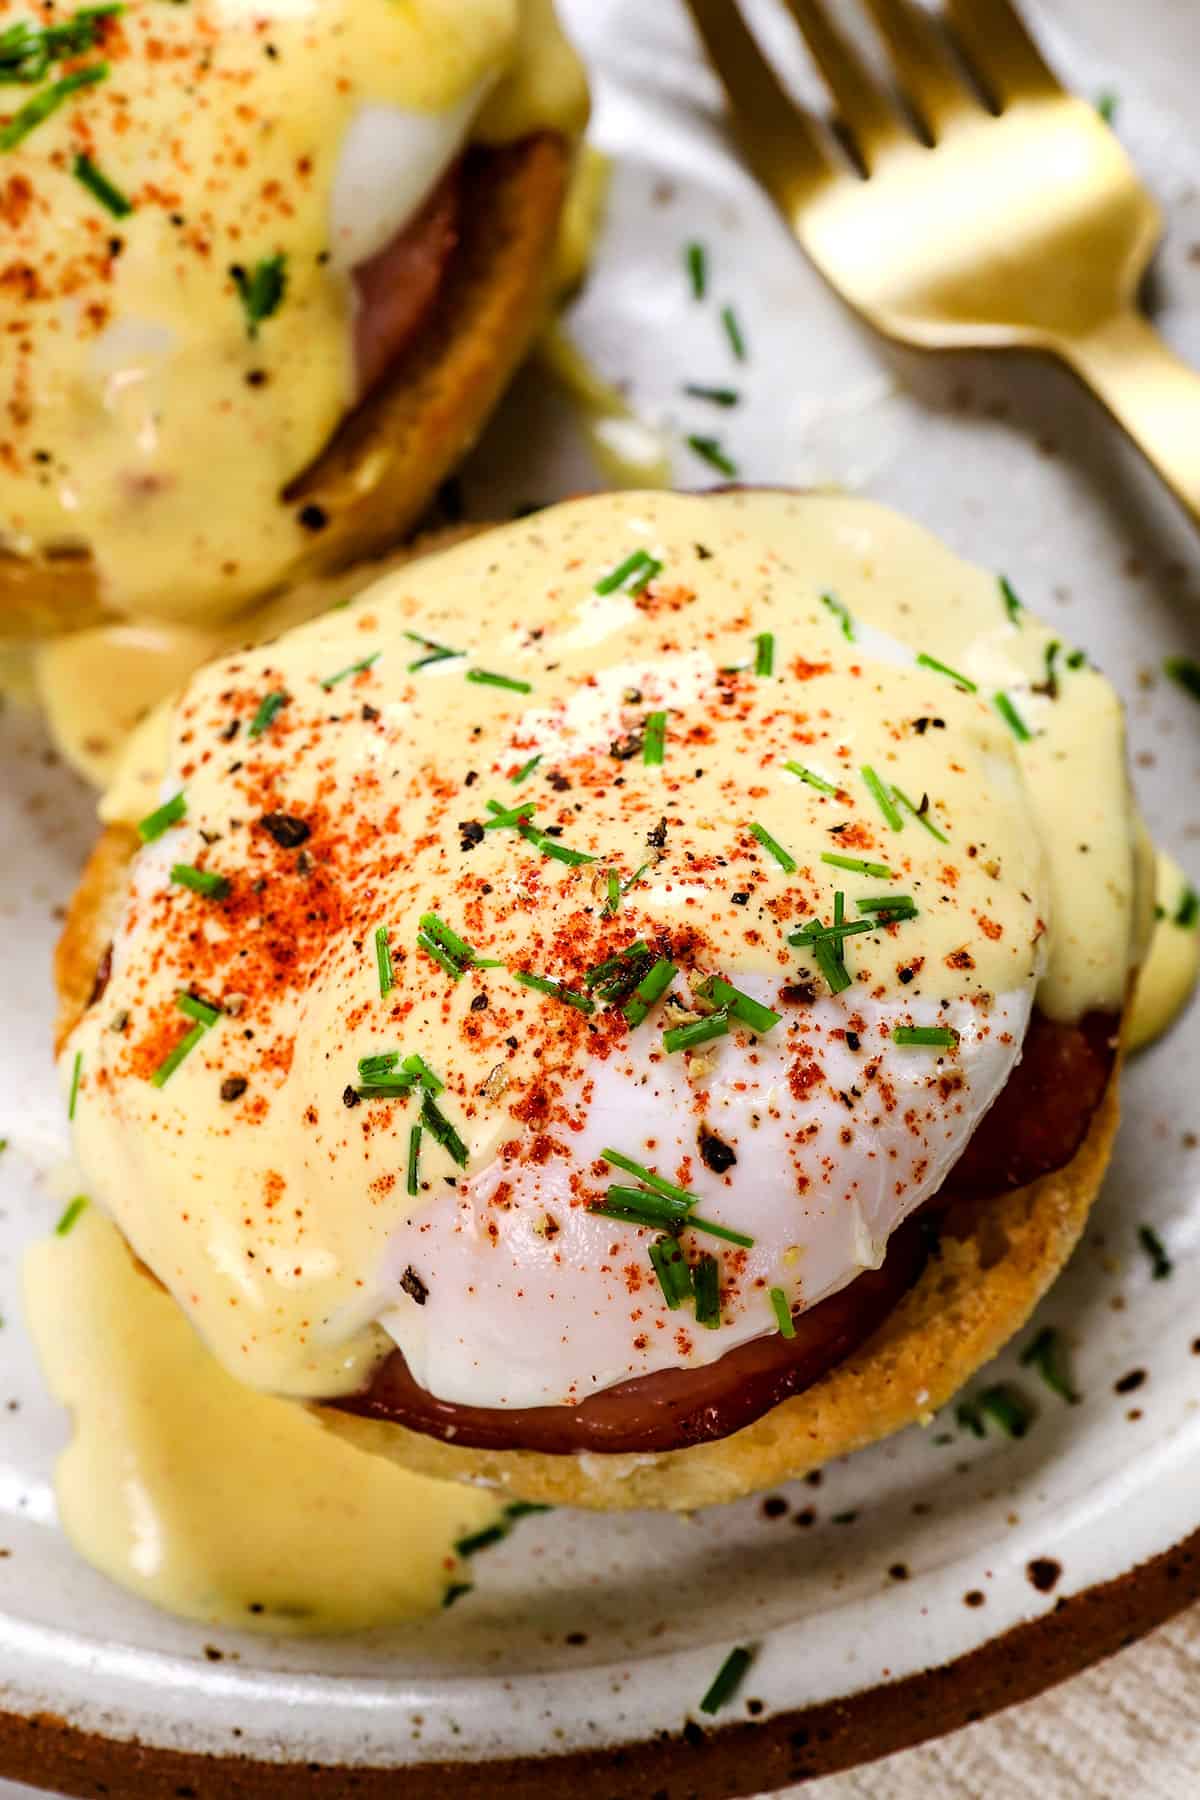 serving egg benedict on a plate with a poached egg and Eggs Benedict sauce